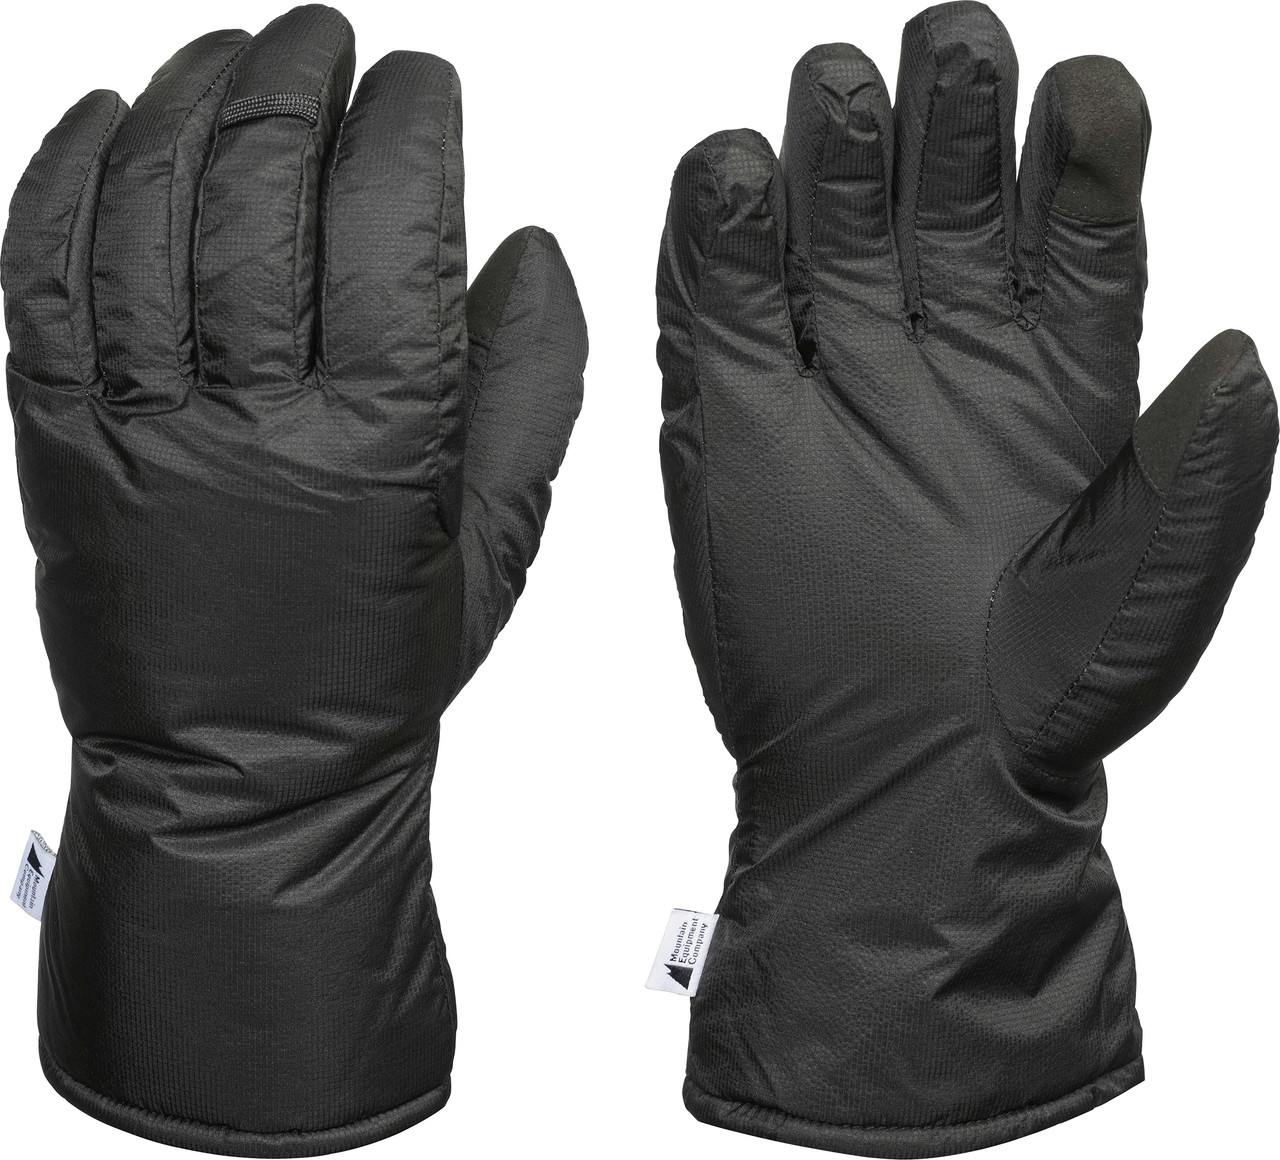 T2 Warmer Insulated Liner Gloves Black